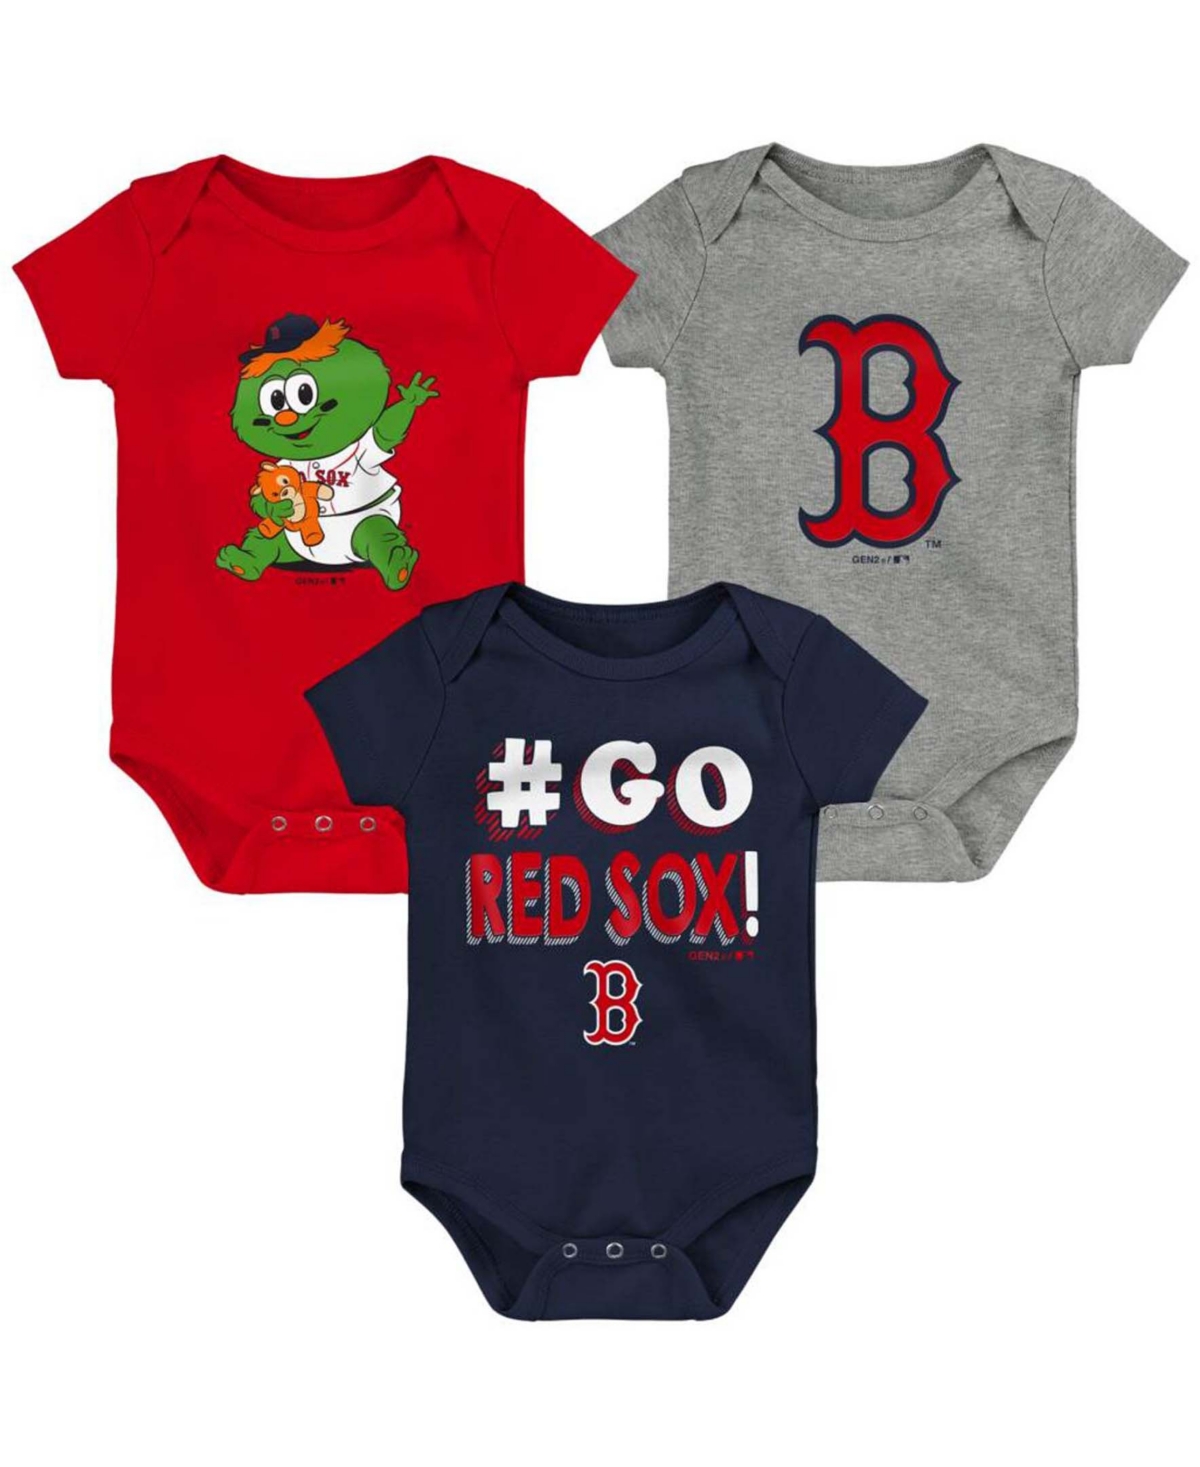 Outerstuff Babies' Newborn Infant Navy, Red, Gray Boston Red Sox Born To Win Bodysuit Set, 3 Pack In Navy,red,gray